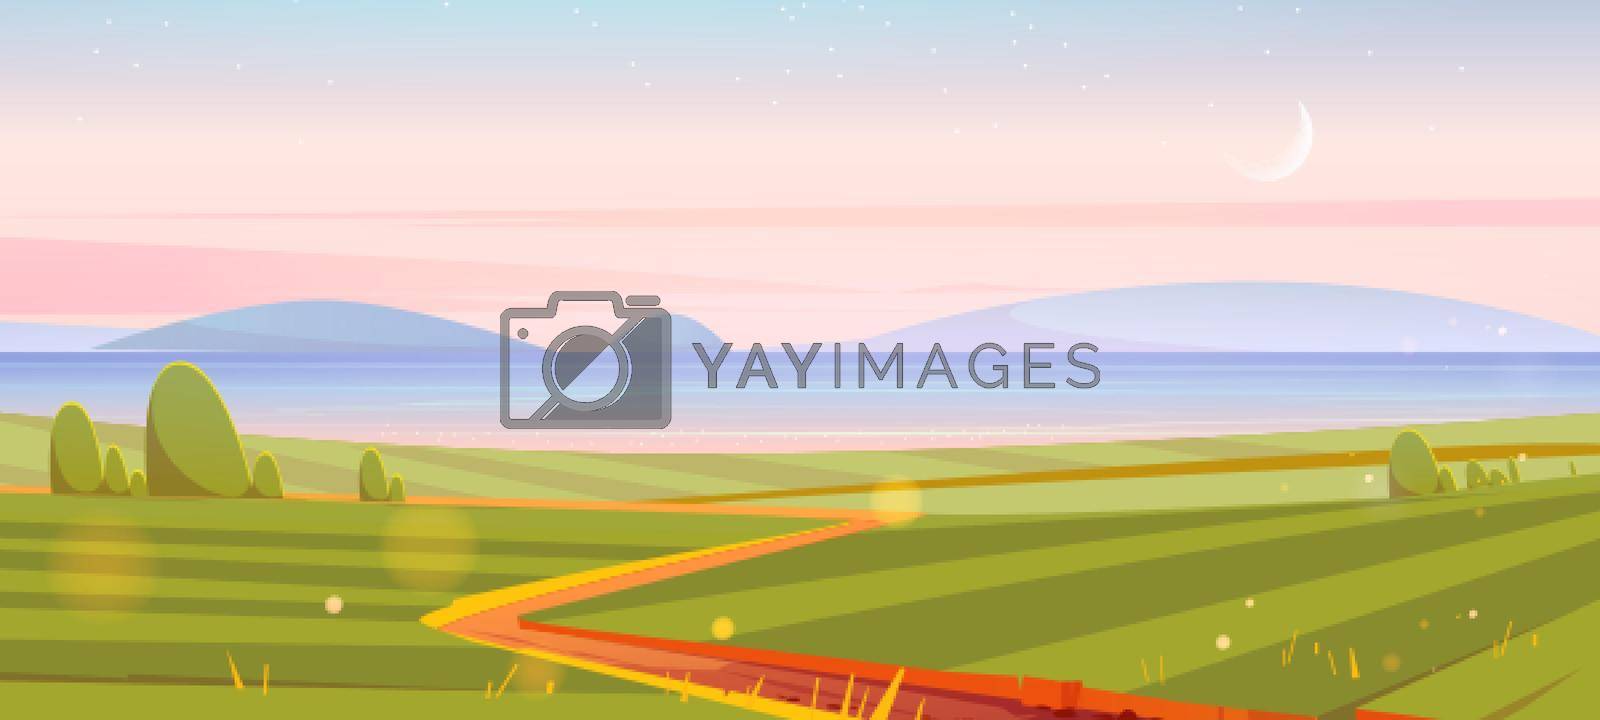 Royalty free image of River, green fields, hills and moon in sky by vectorart